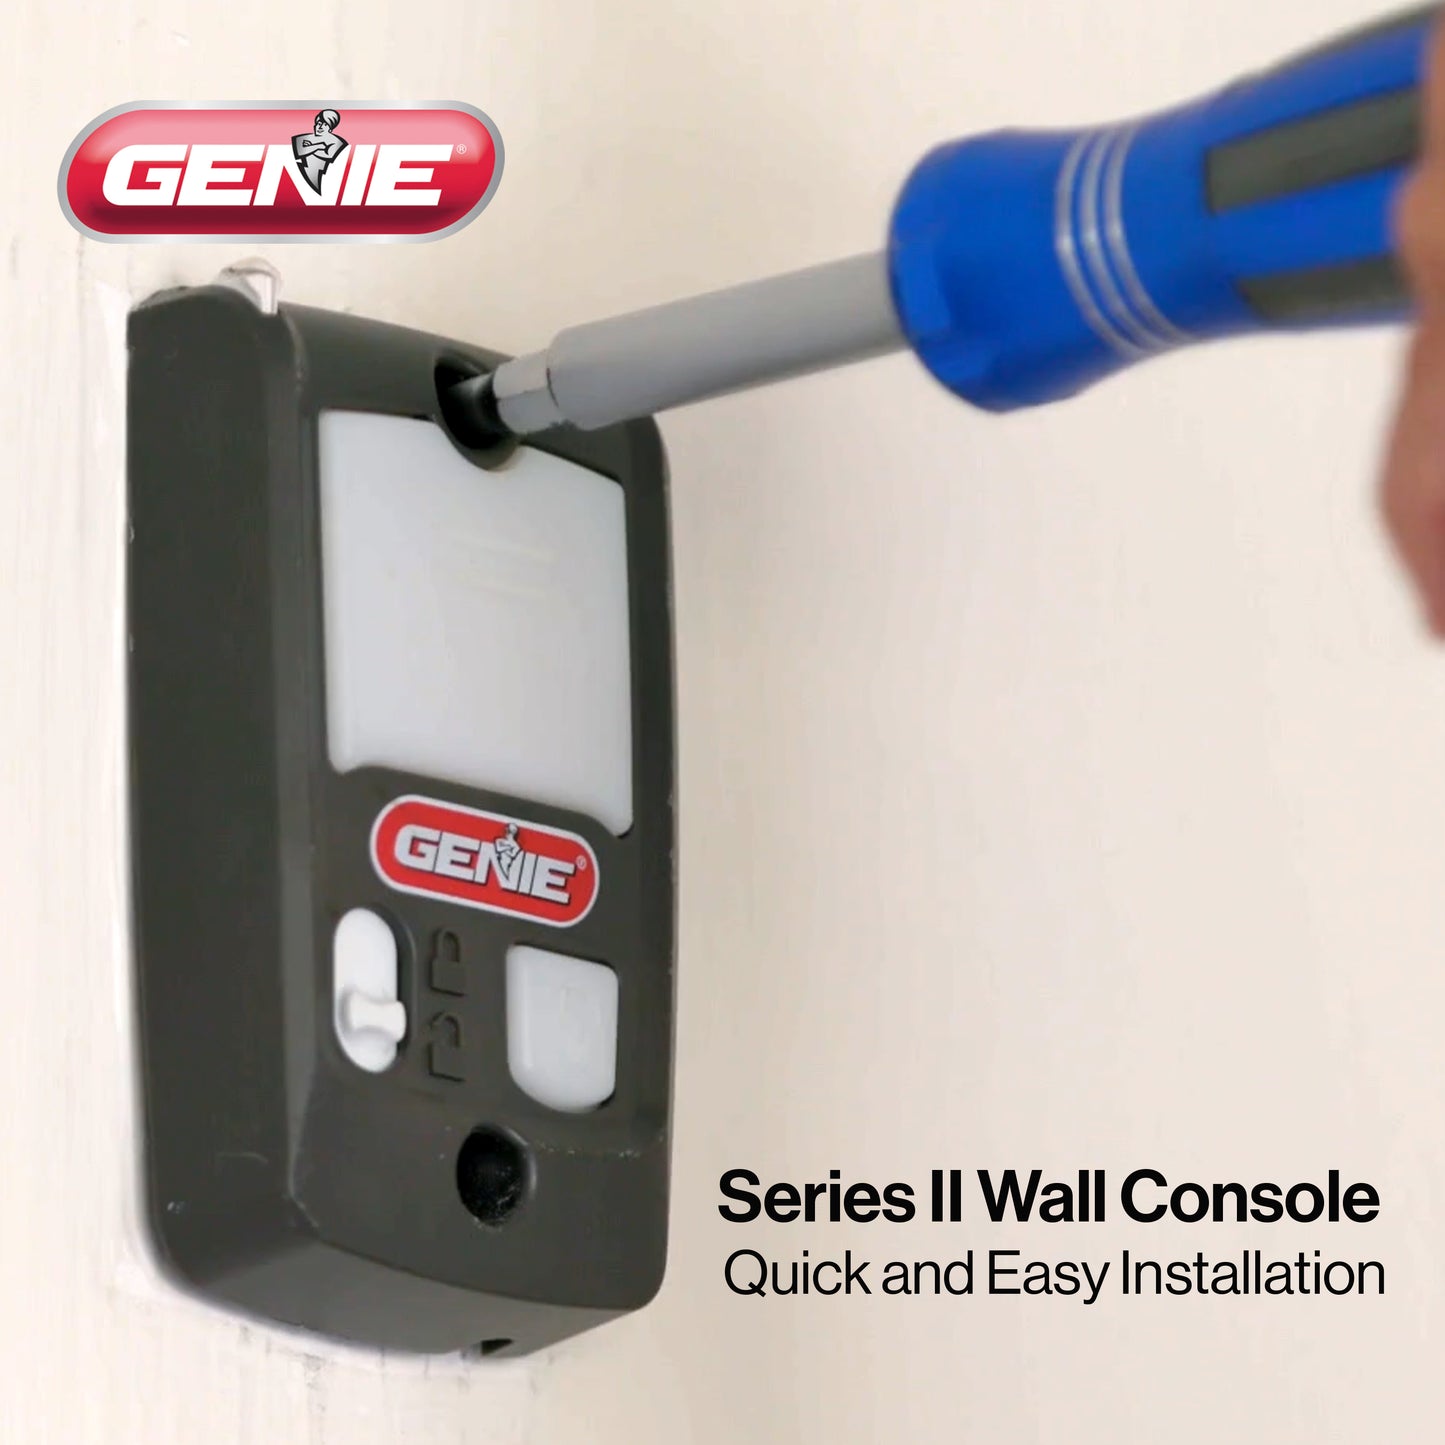 Series II wall console being installed_quick and easy installation